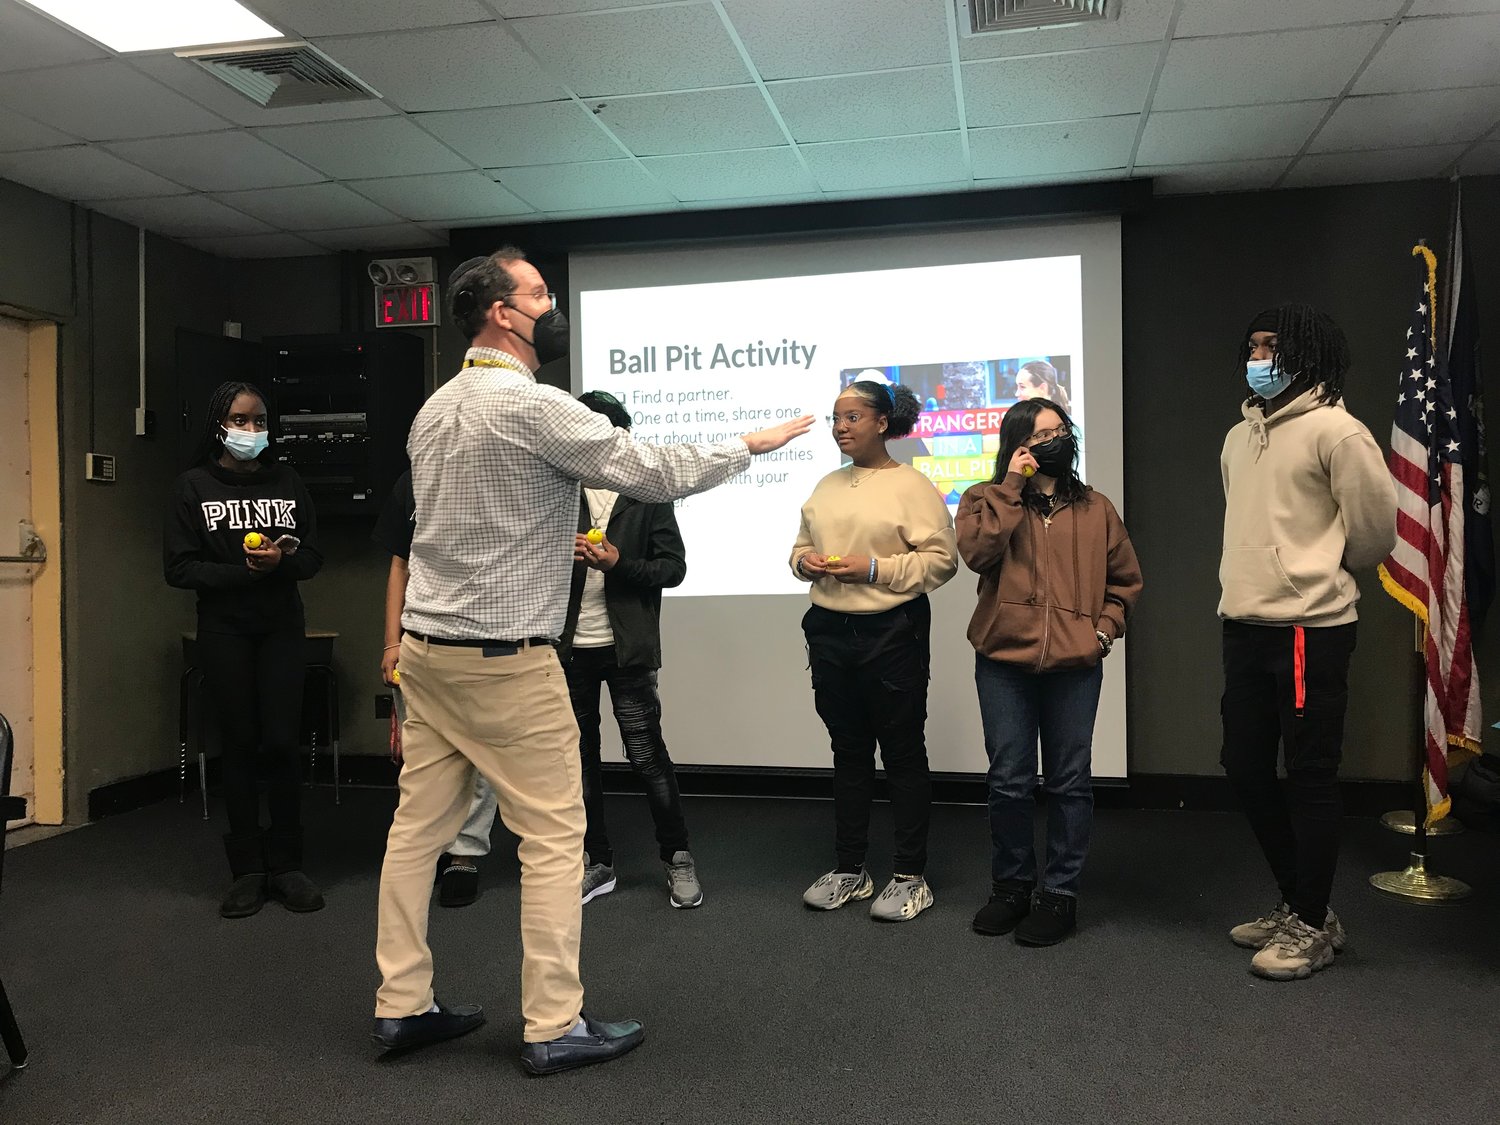 Students participated in the interactive workshops which were hosted by Dr. Avi Marcovitz, director of education for the Nassau County Holocaust Memorial and Tolerance Center.